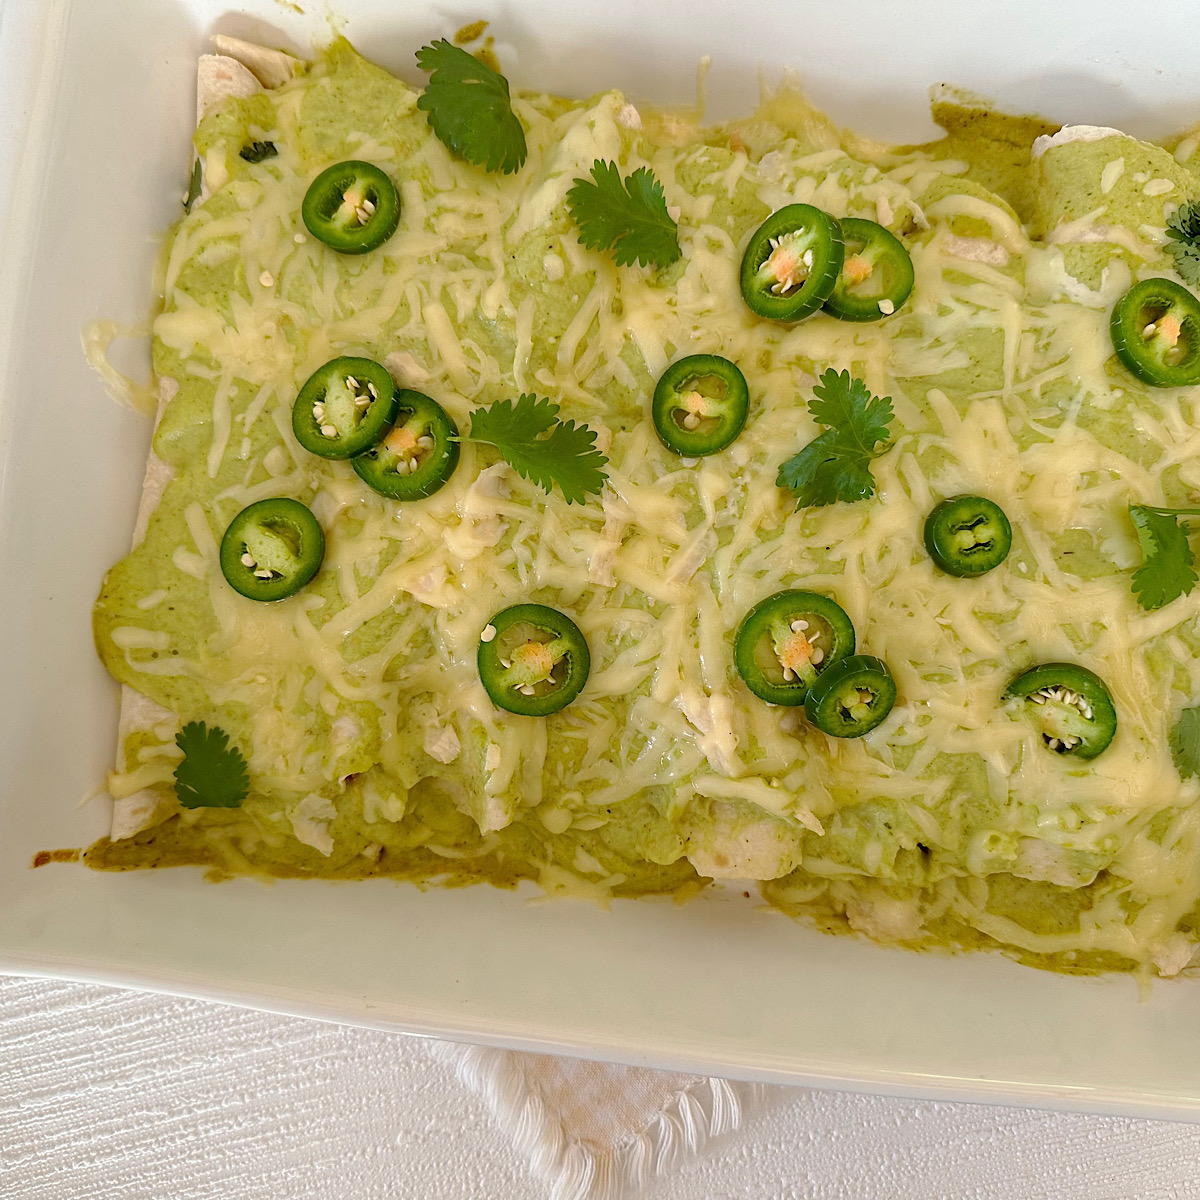 White baking dish of chicken enchiladas with a tomatillo sauce and topped with cheese.